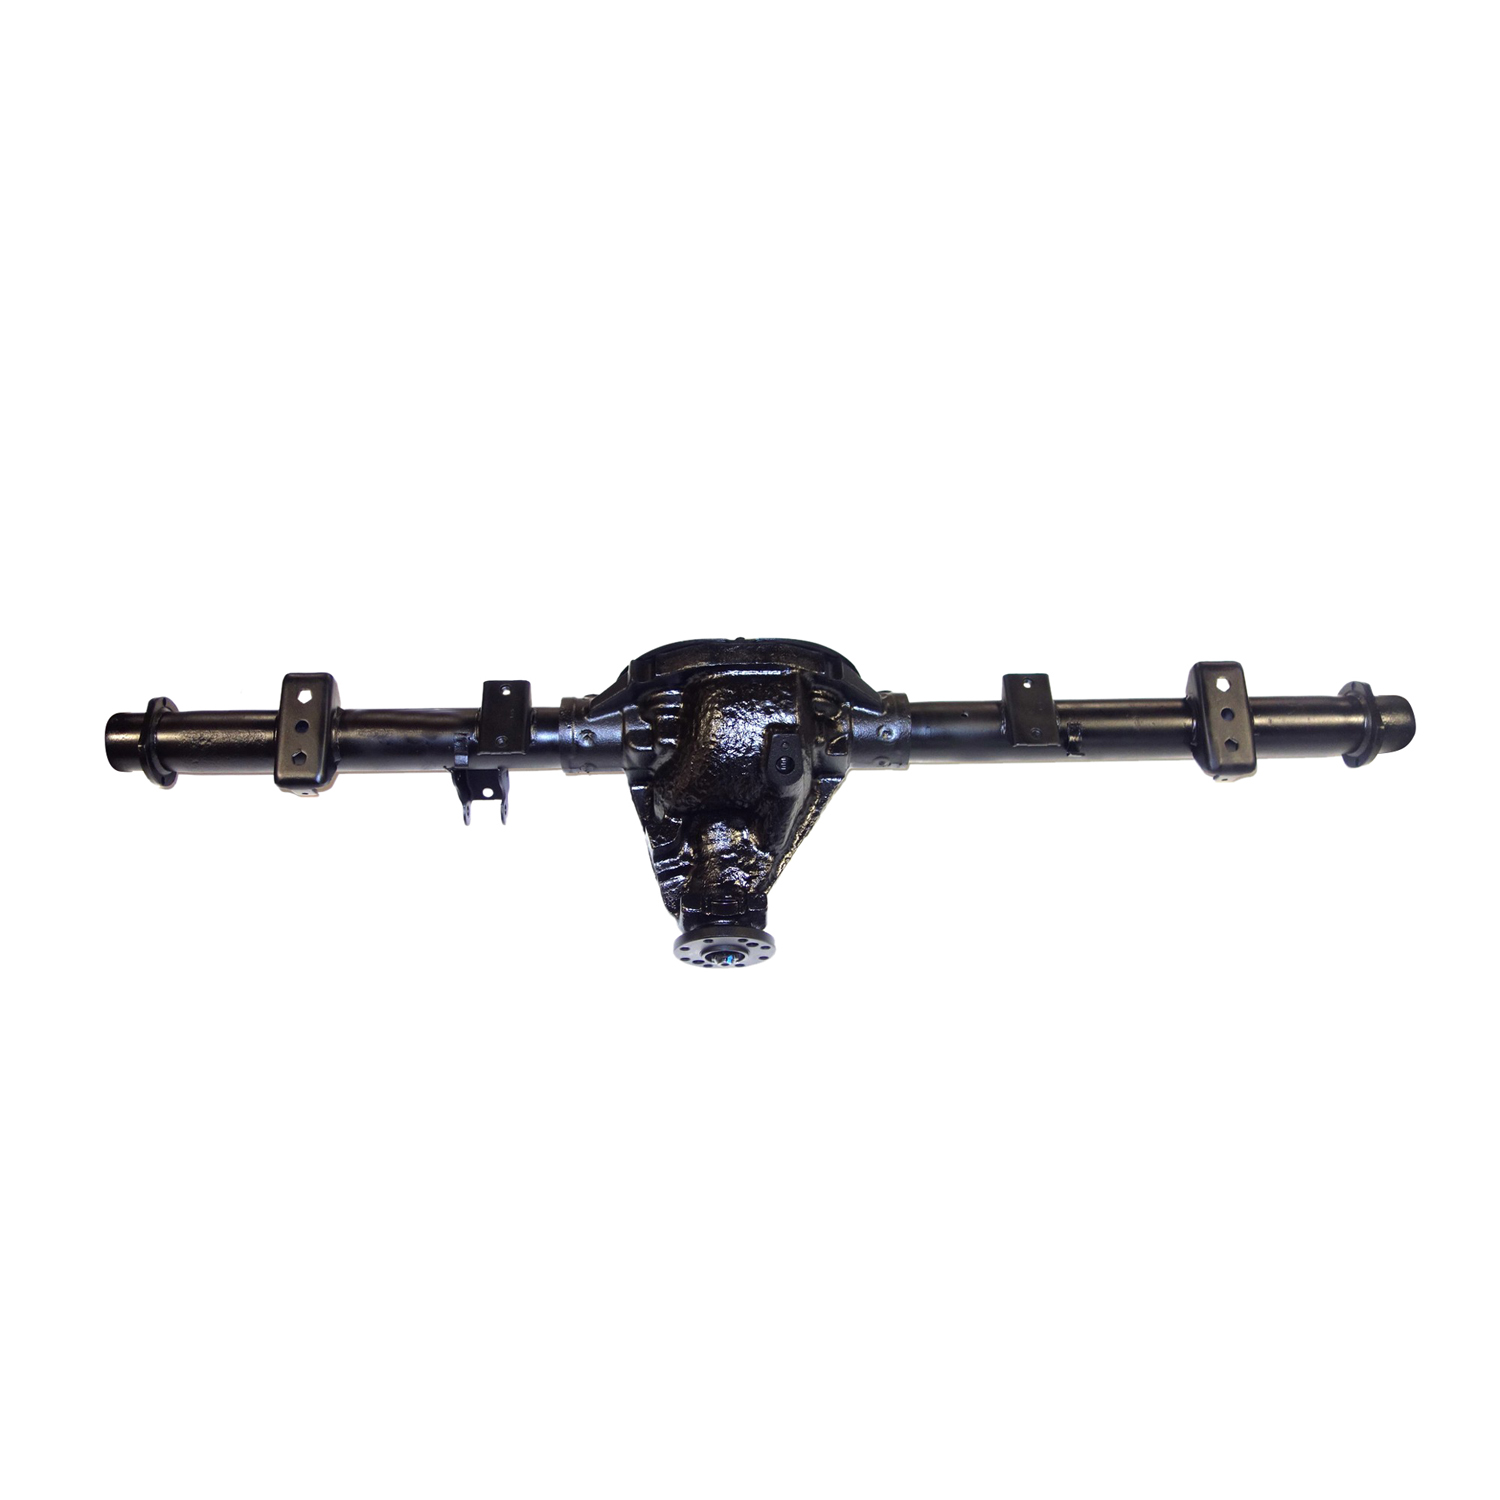 Remanufactured Axle Assy Chy 8.25" 04-05 Durango 3.92 , 4x4 w/o Traction Control, Posi